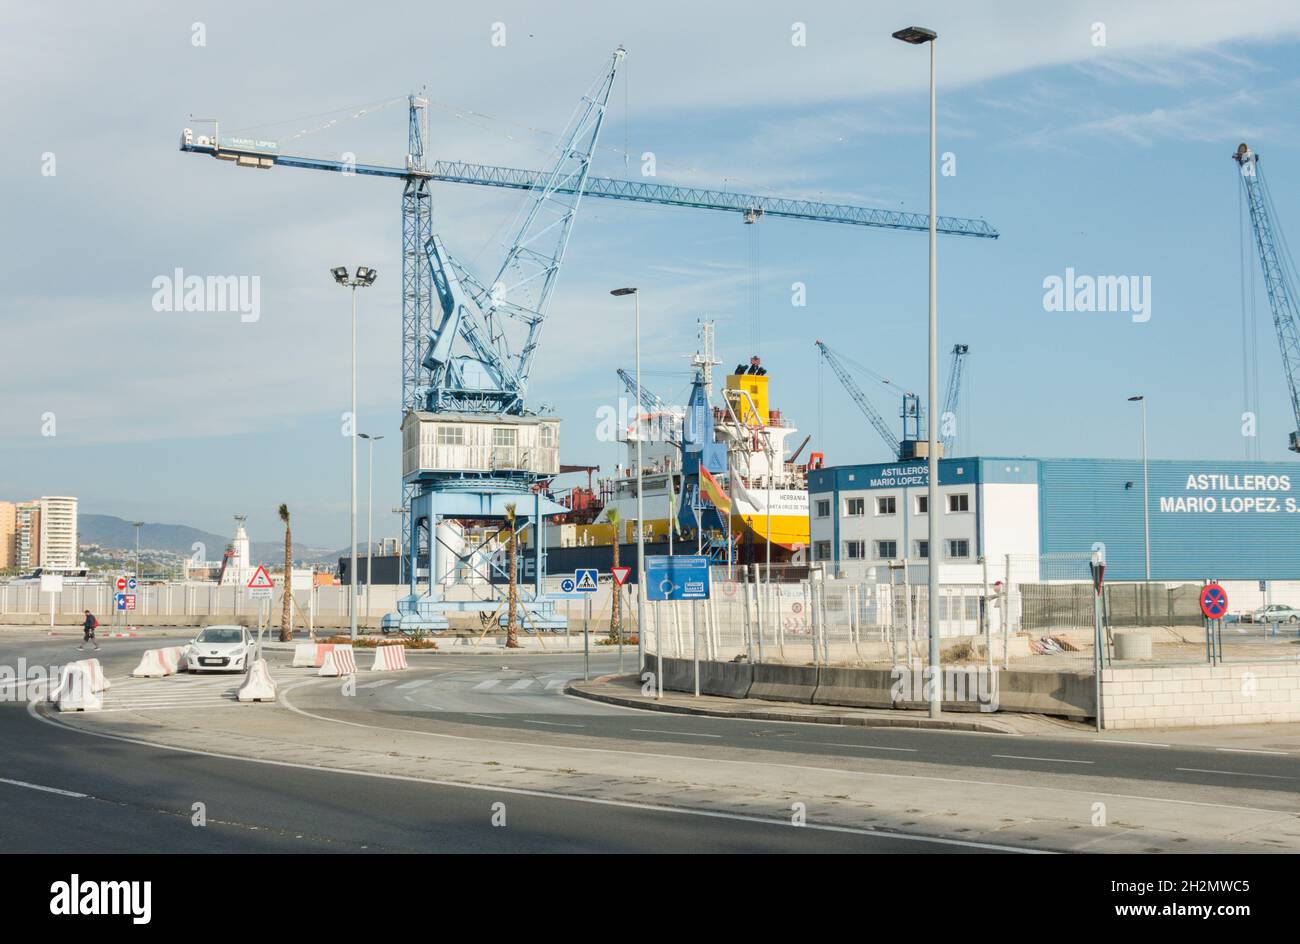 Old blue crane in industrial setting, port of Malaga, Spain. Stock Photo